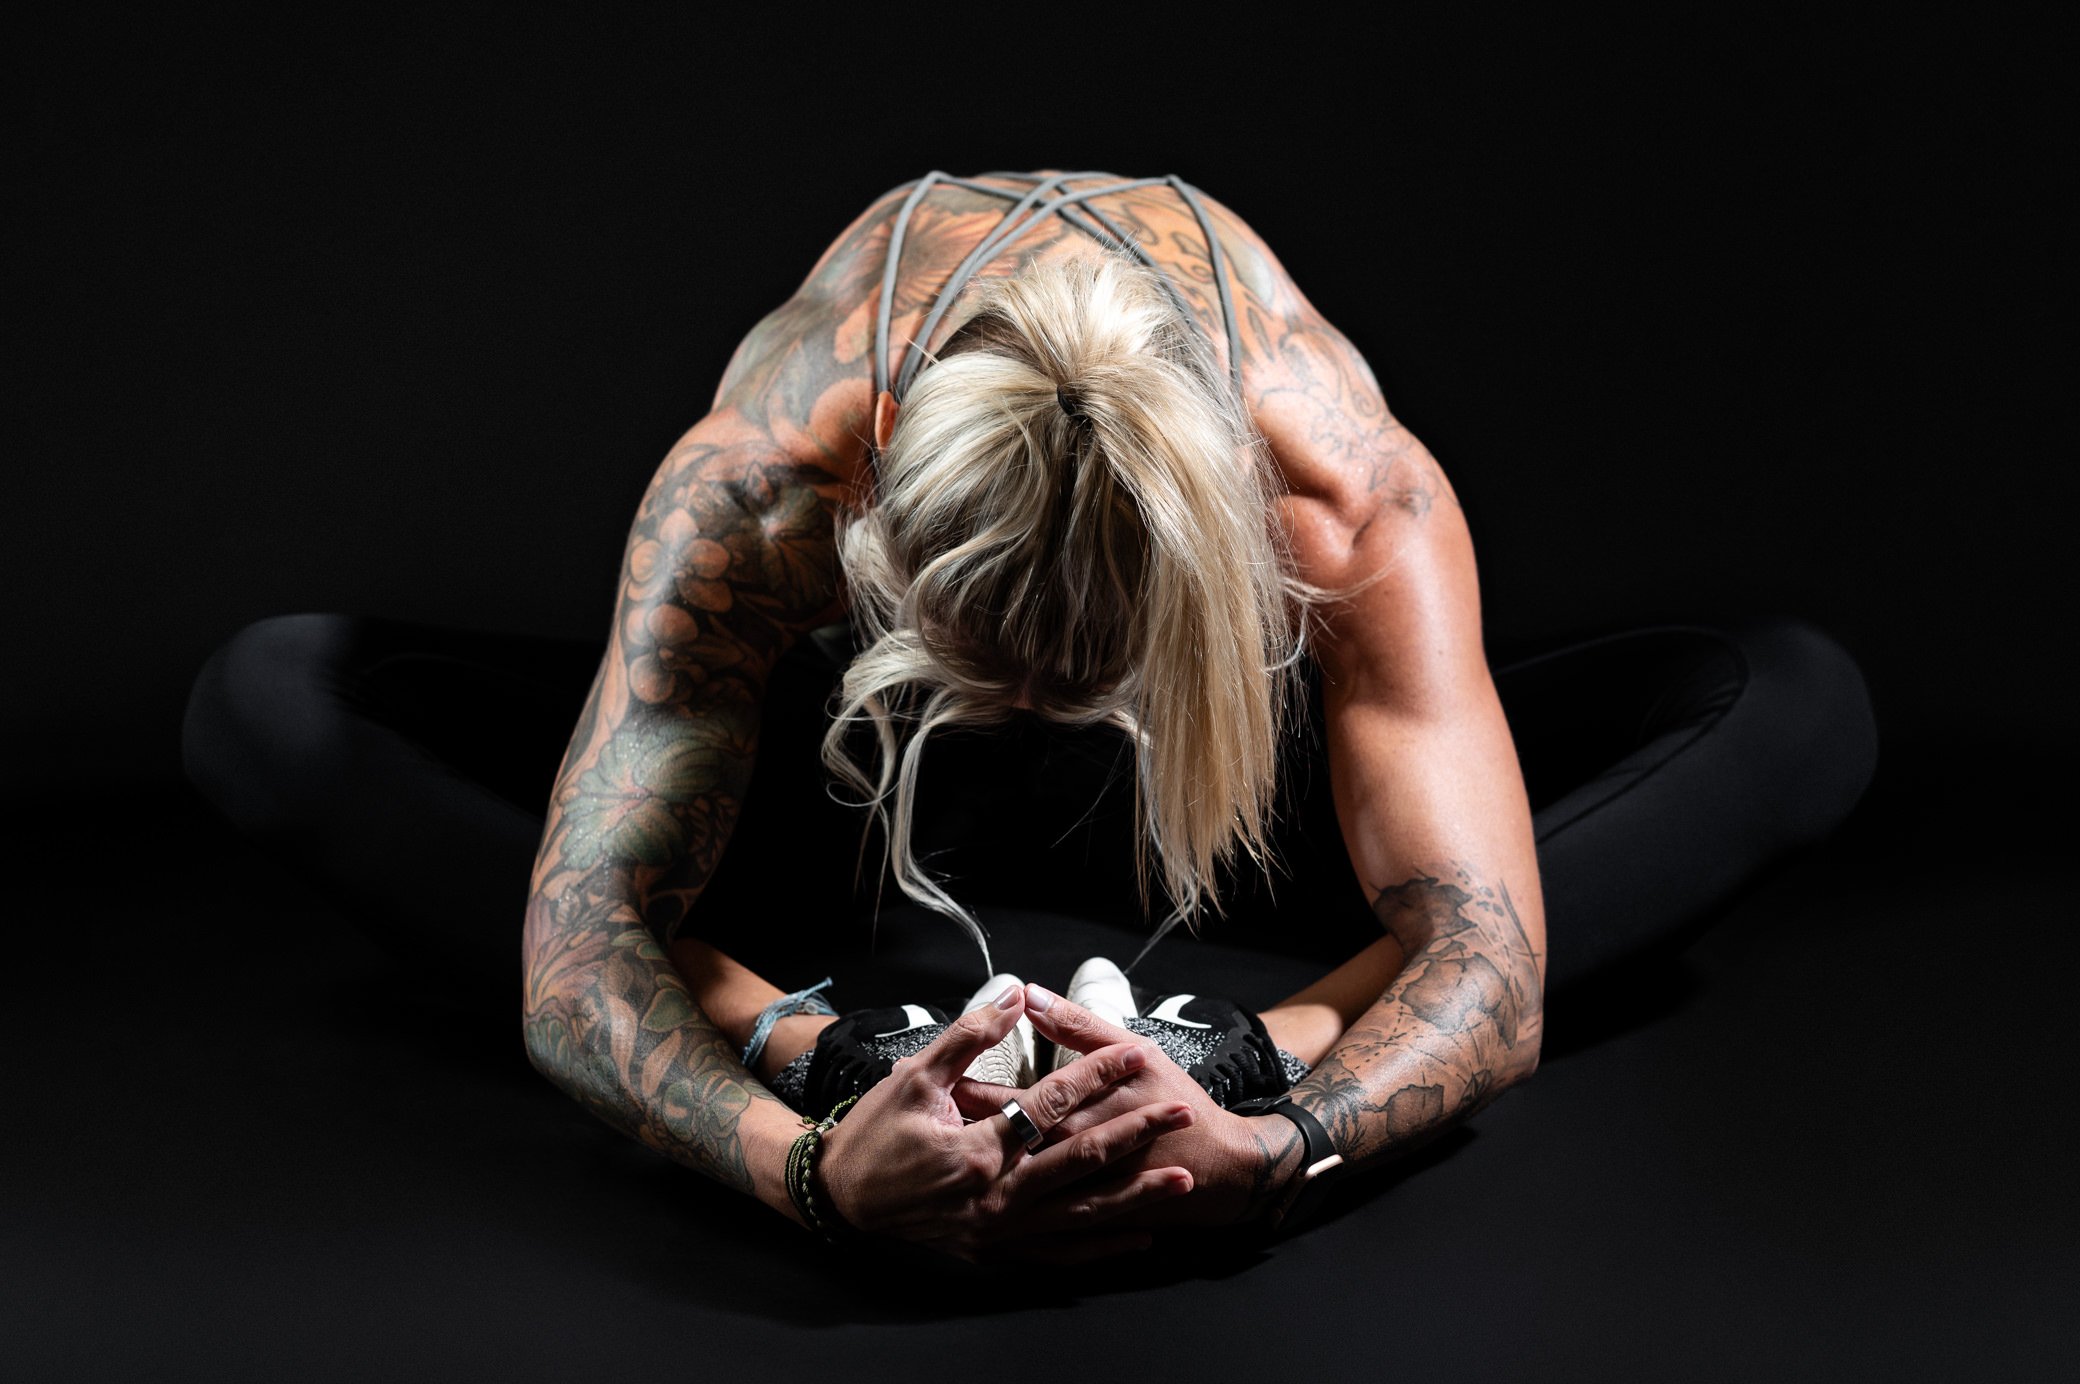 Branding Photoshoot for Fitness Coach and Personal Trainer Jaelyn Israel by Miranda Kelton Photography.JPG